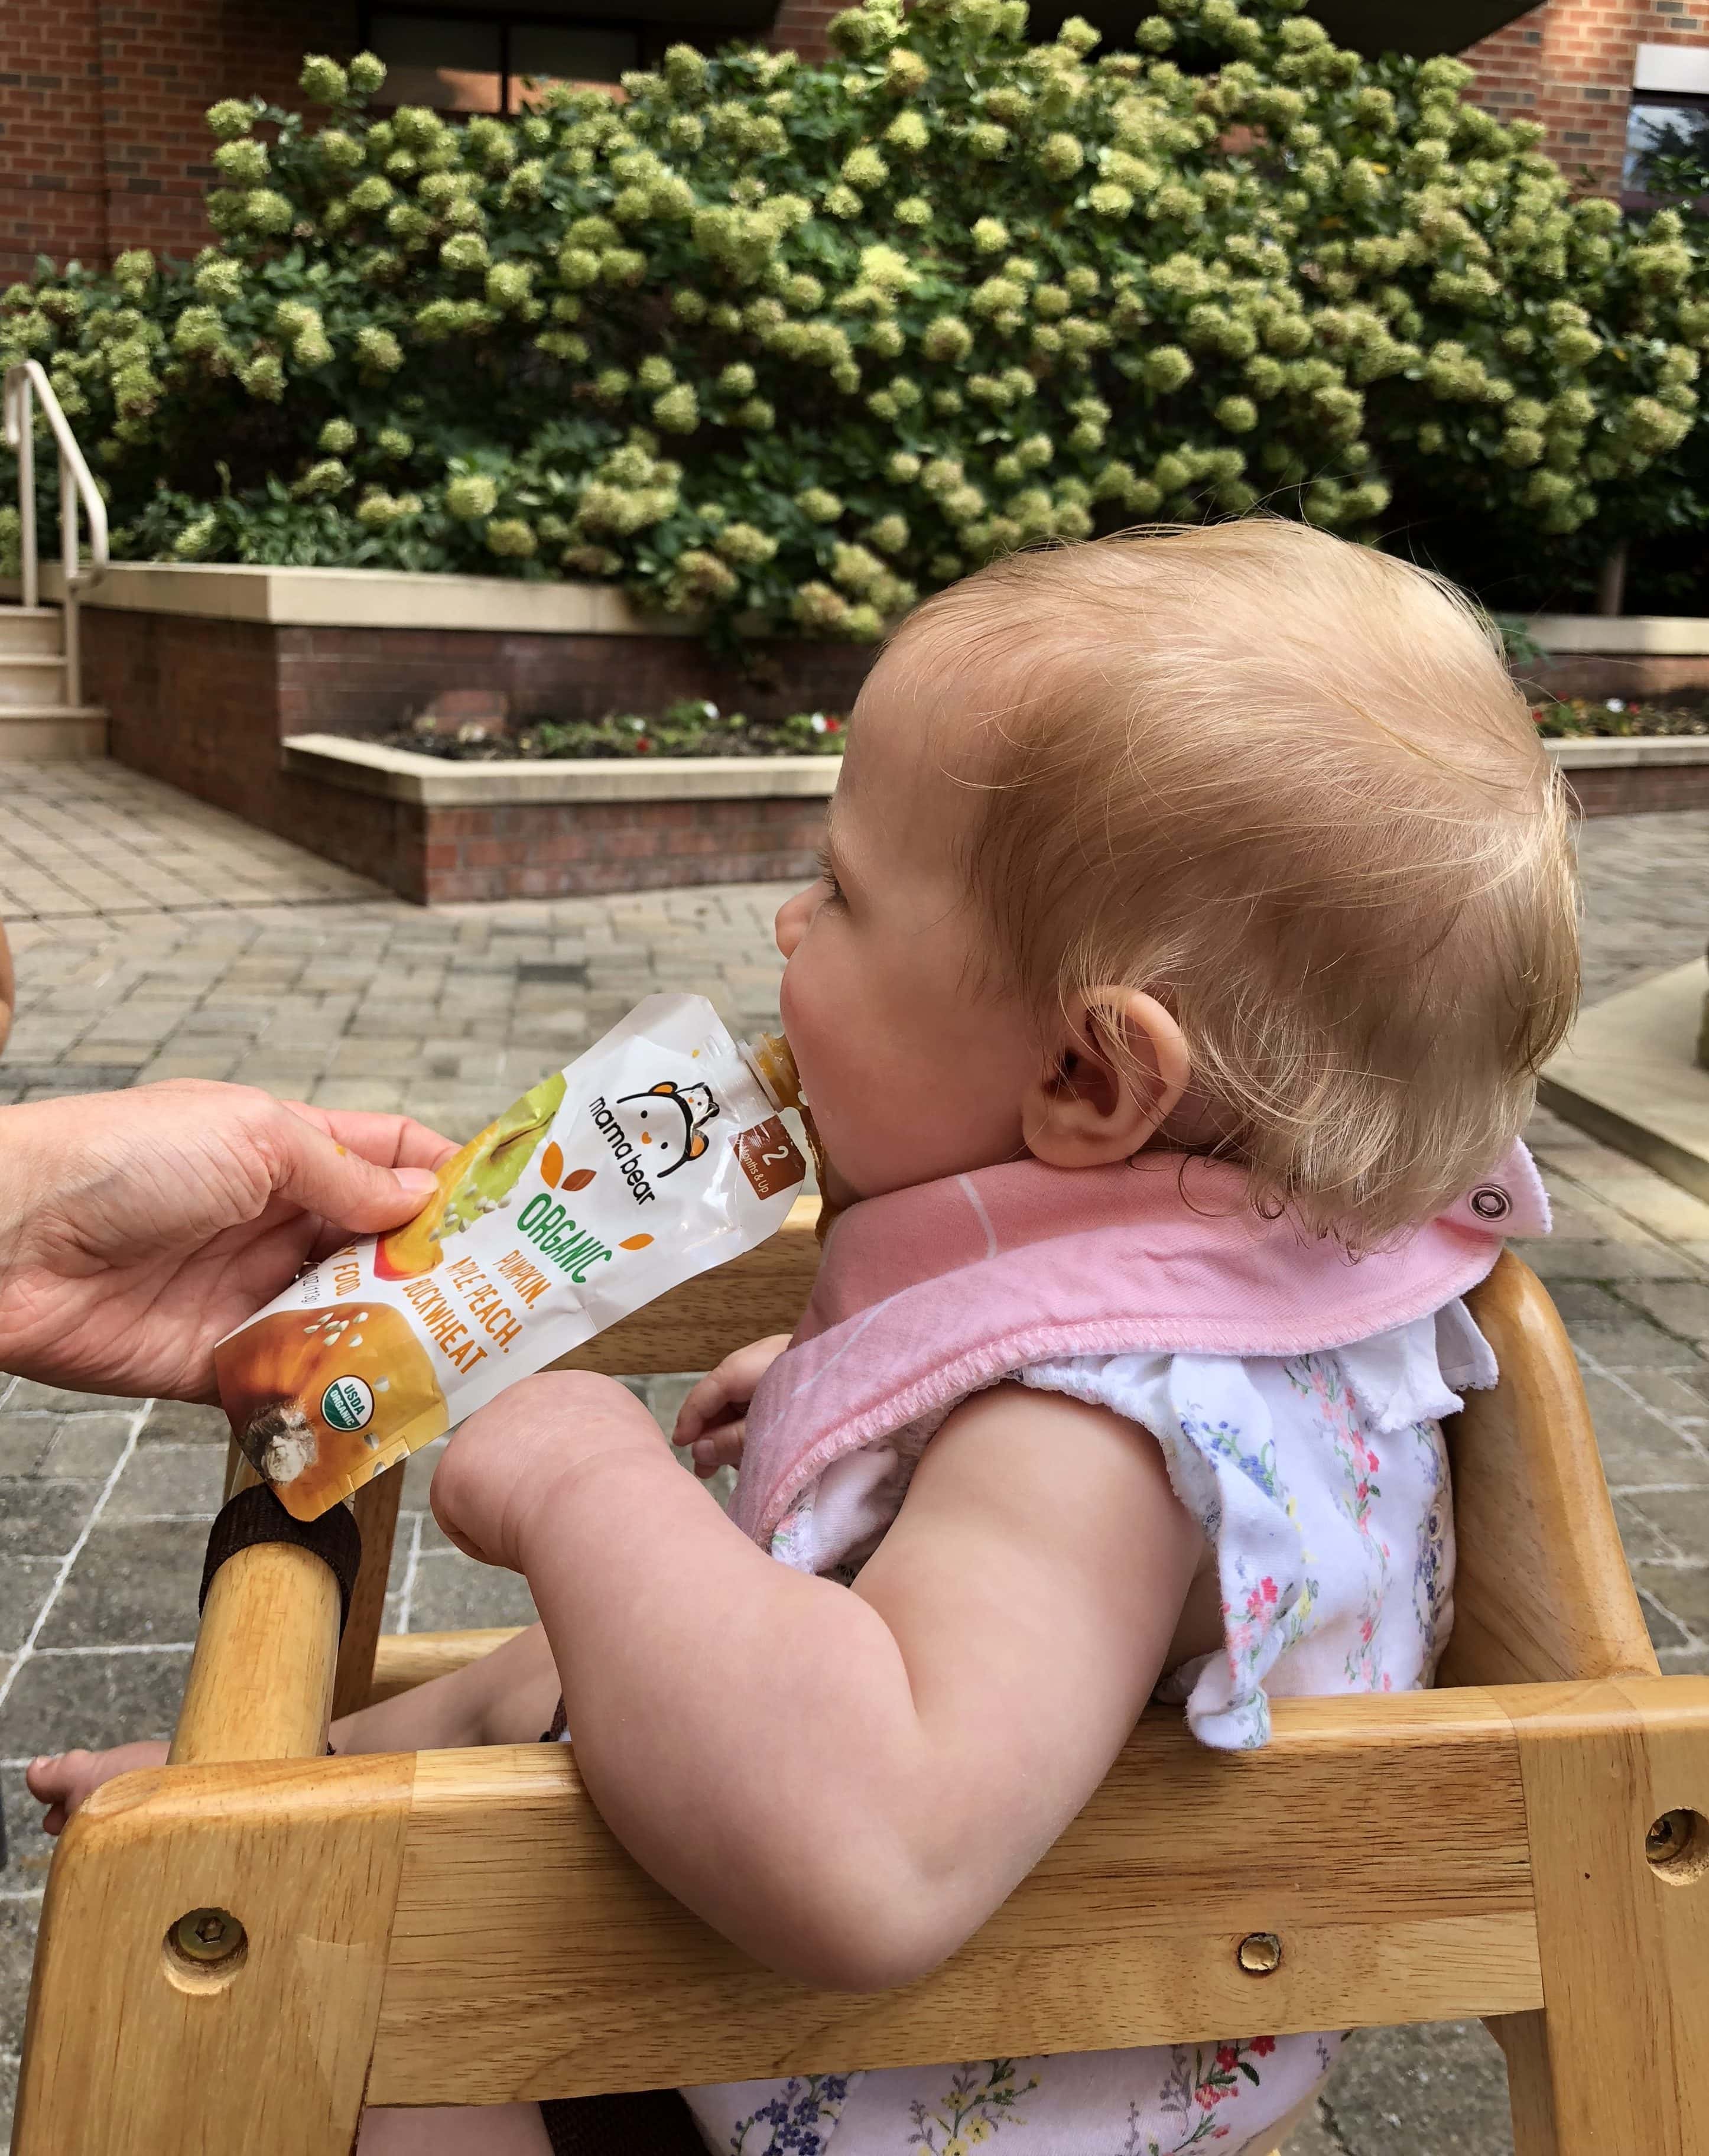 Organic Baby & Toddler Meals at Whole Foods Market